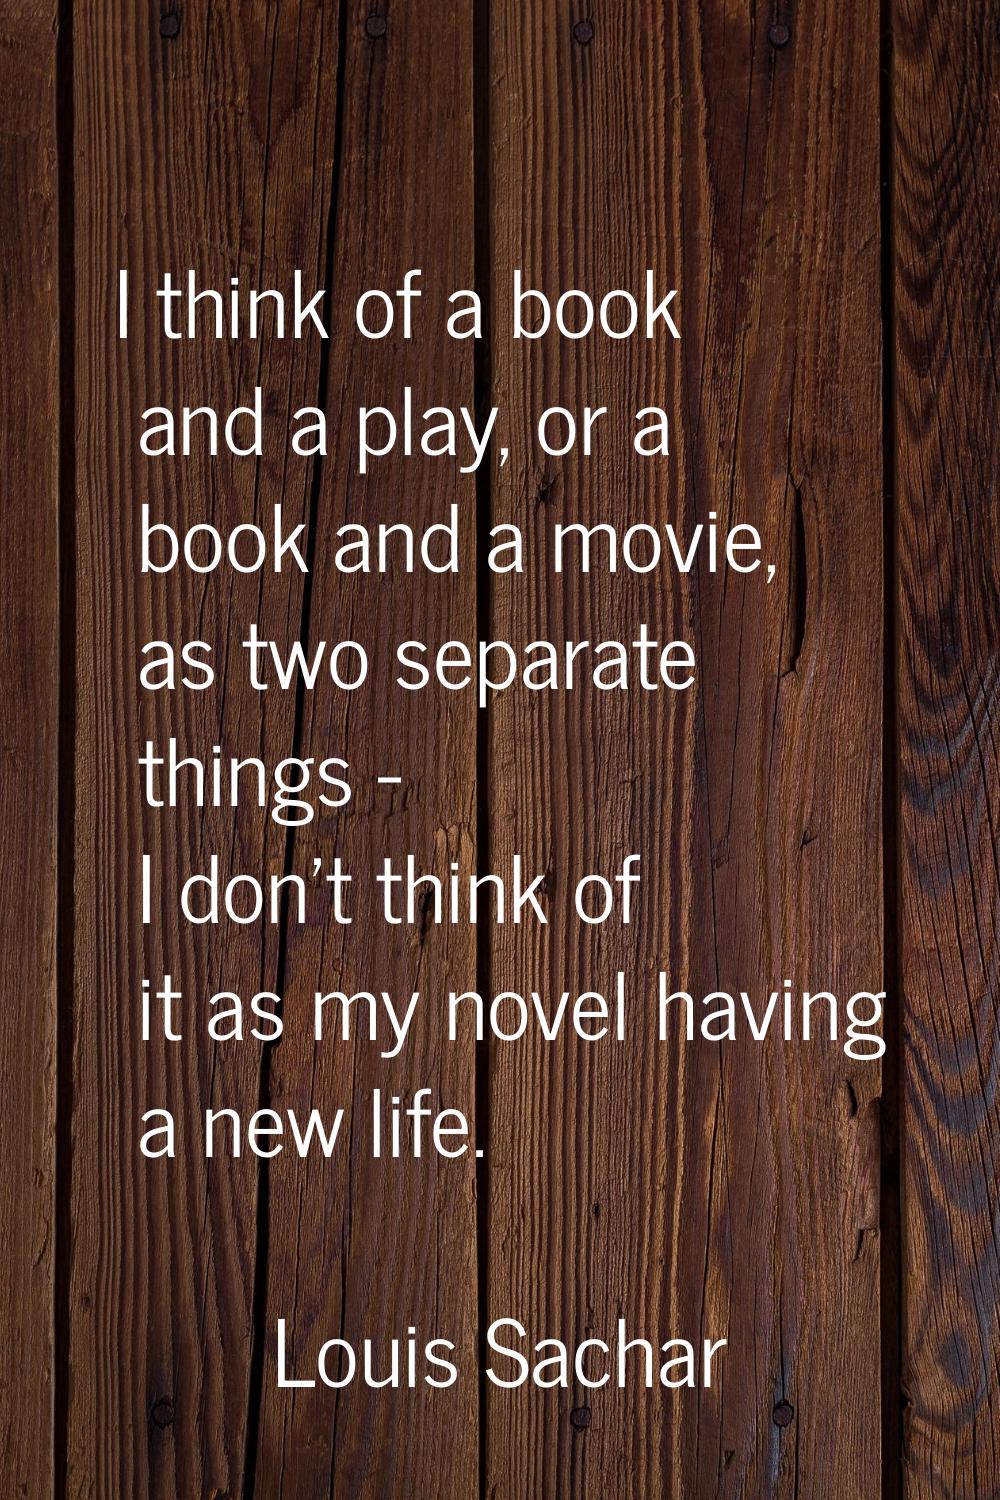 I think of a book and a play, or a book and a movie, as two separate things - I don't think of it a